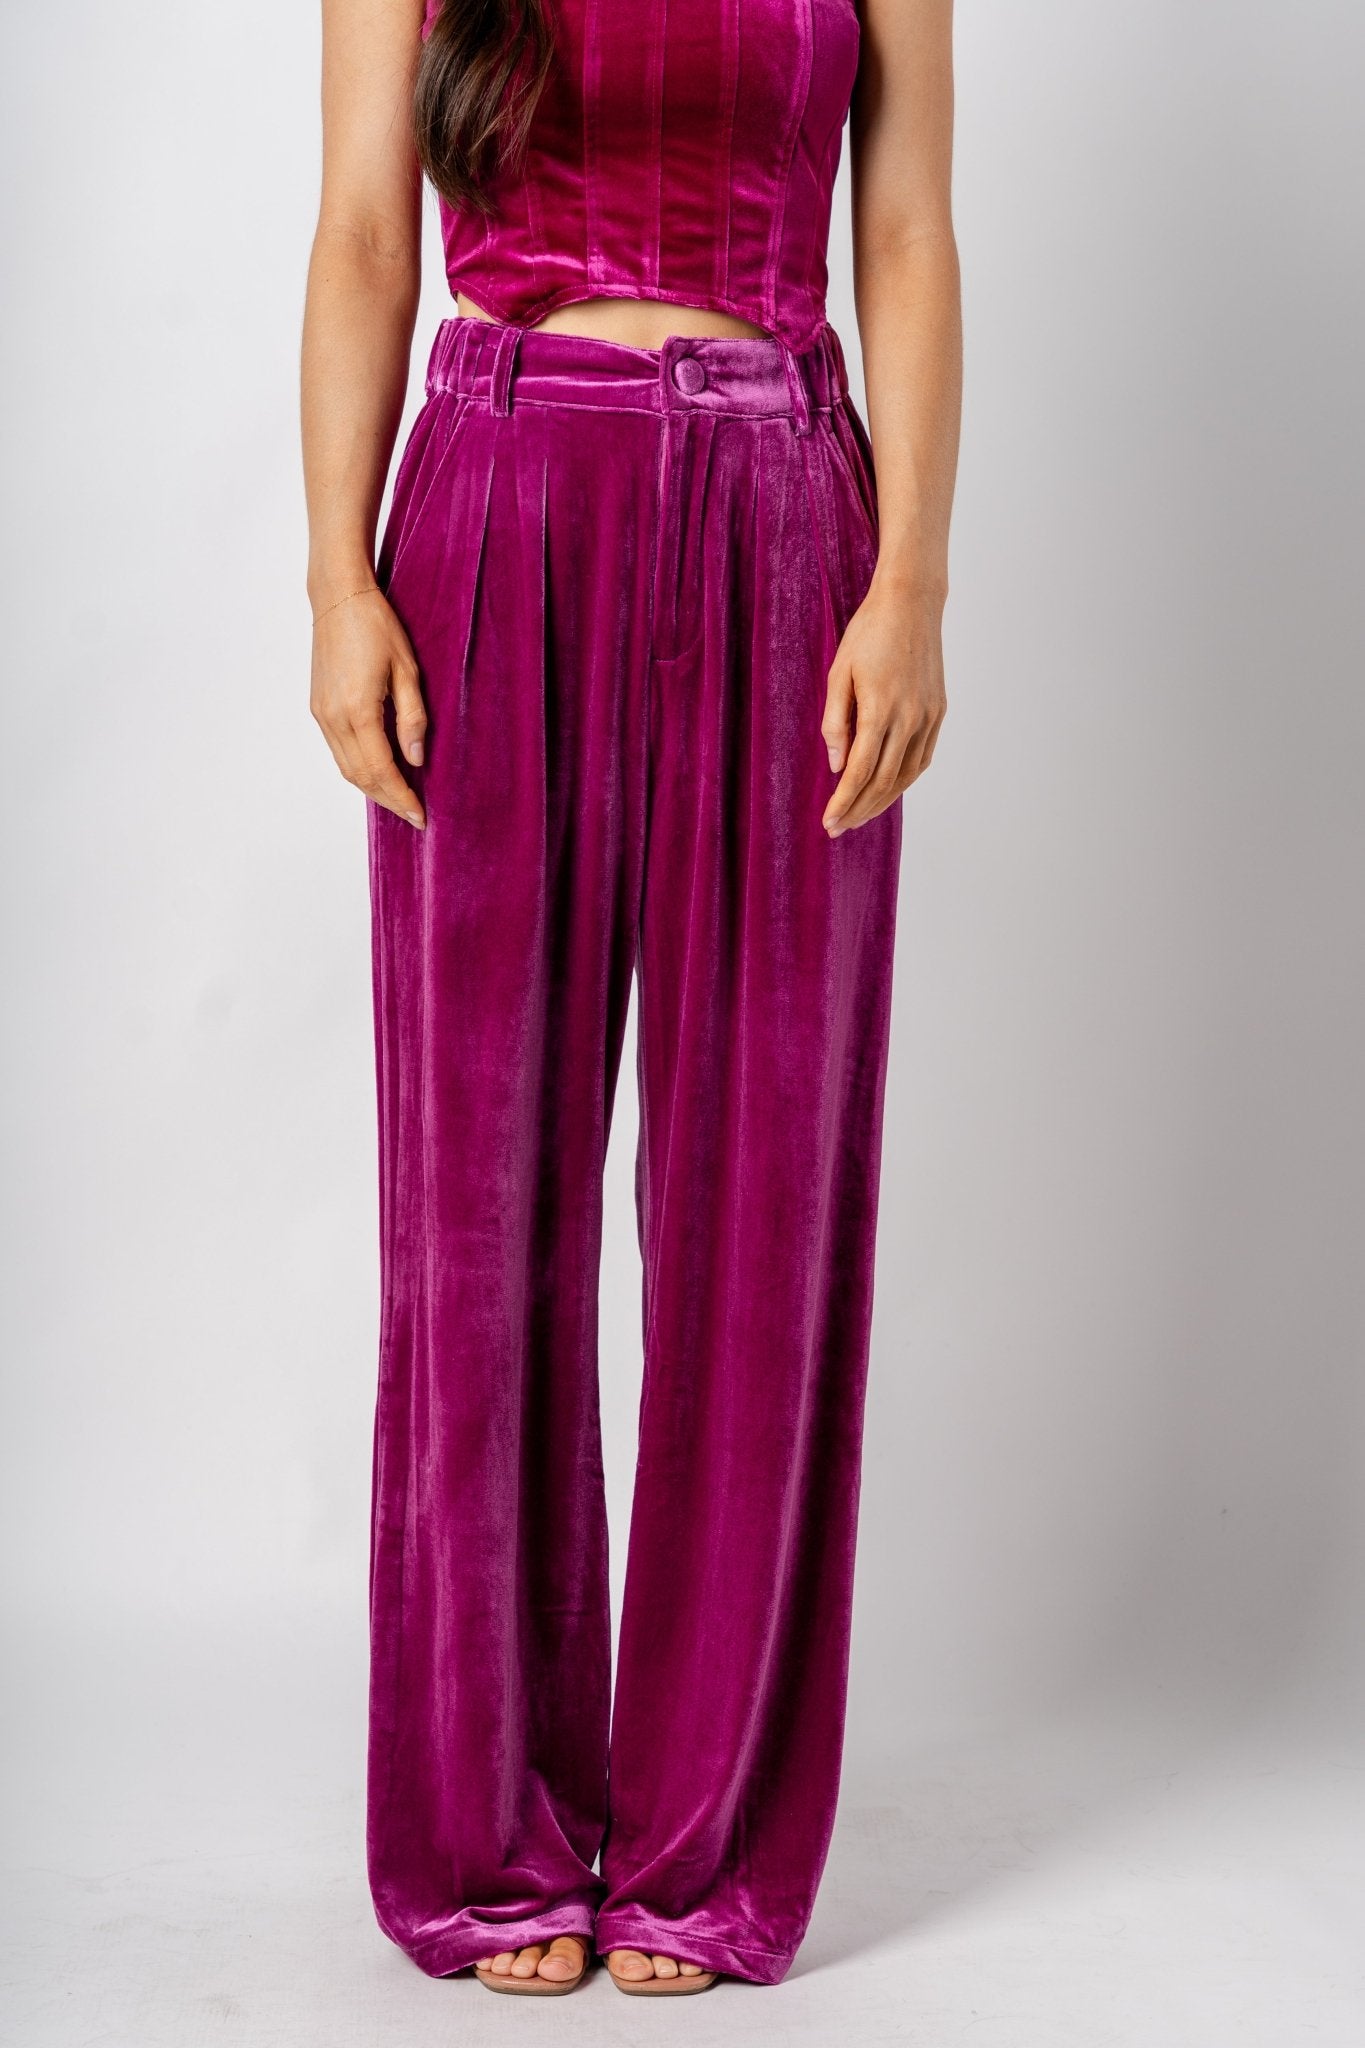 Velvet wide leg pants magenta - Affordable New Year's Eve Party Outfits at Lush Fashion Lounge Boutique in Oklahoma City